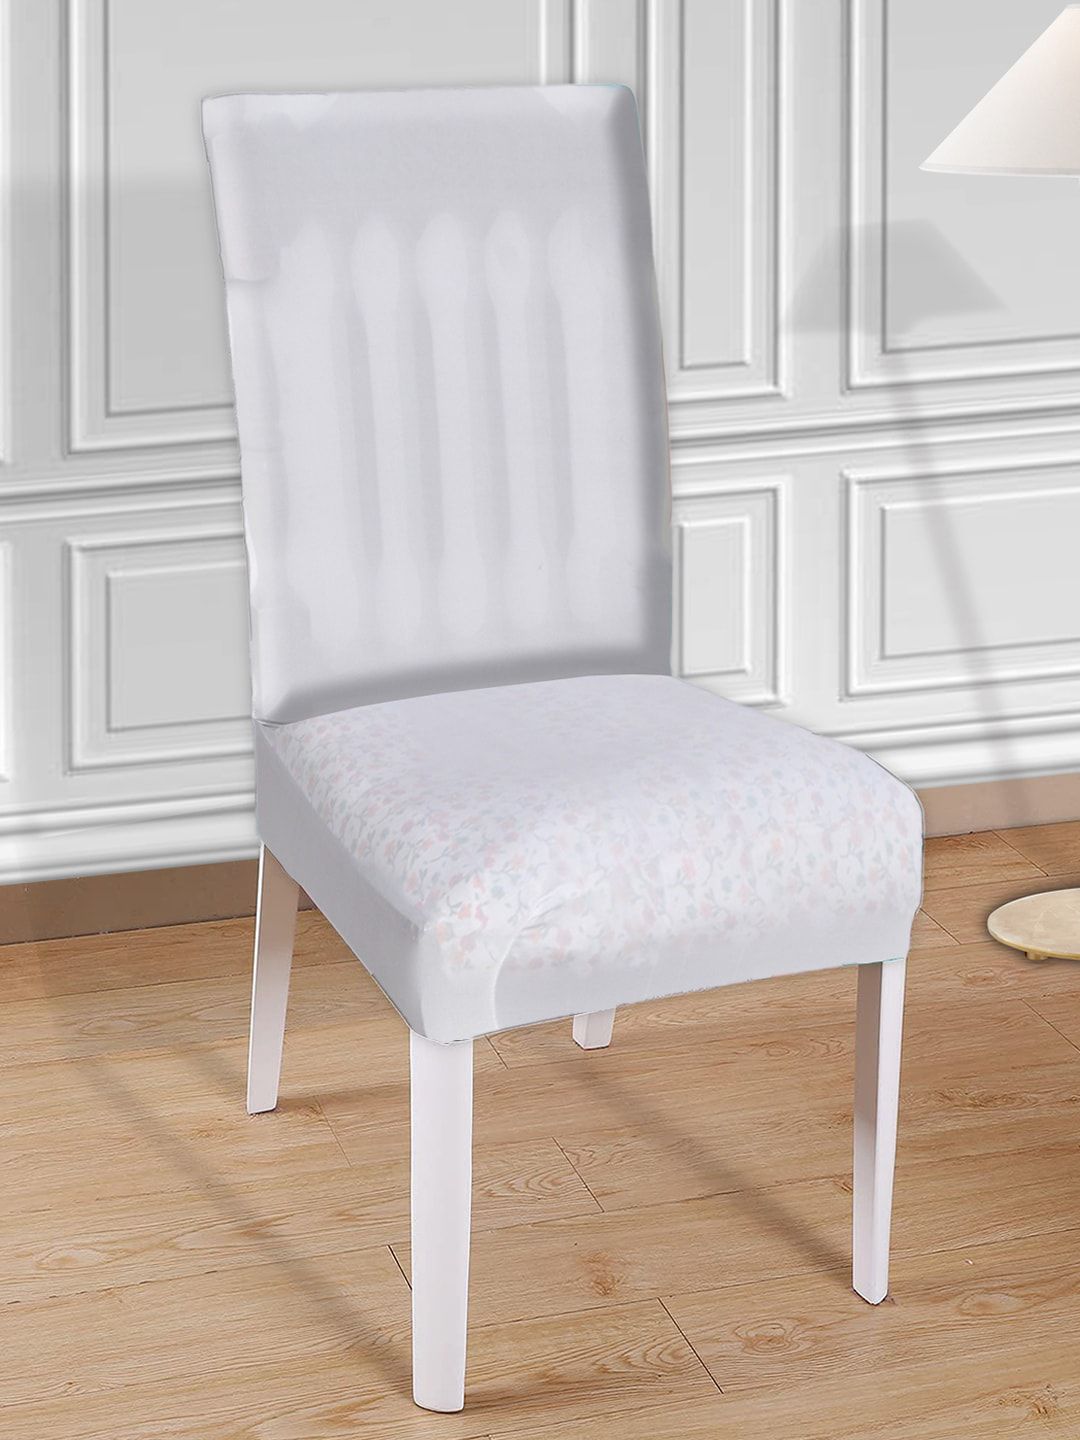 Kuber Industries Set Of 6 White Printed Elastic Stretchable Chair Cover Price in India